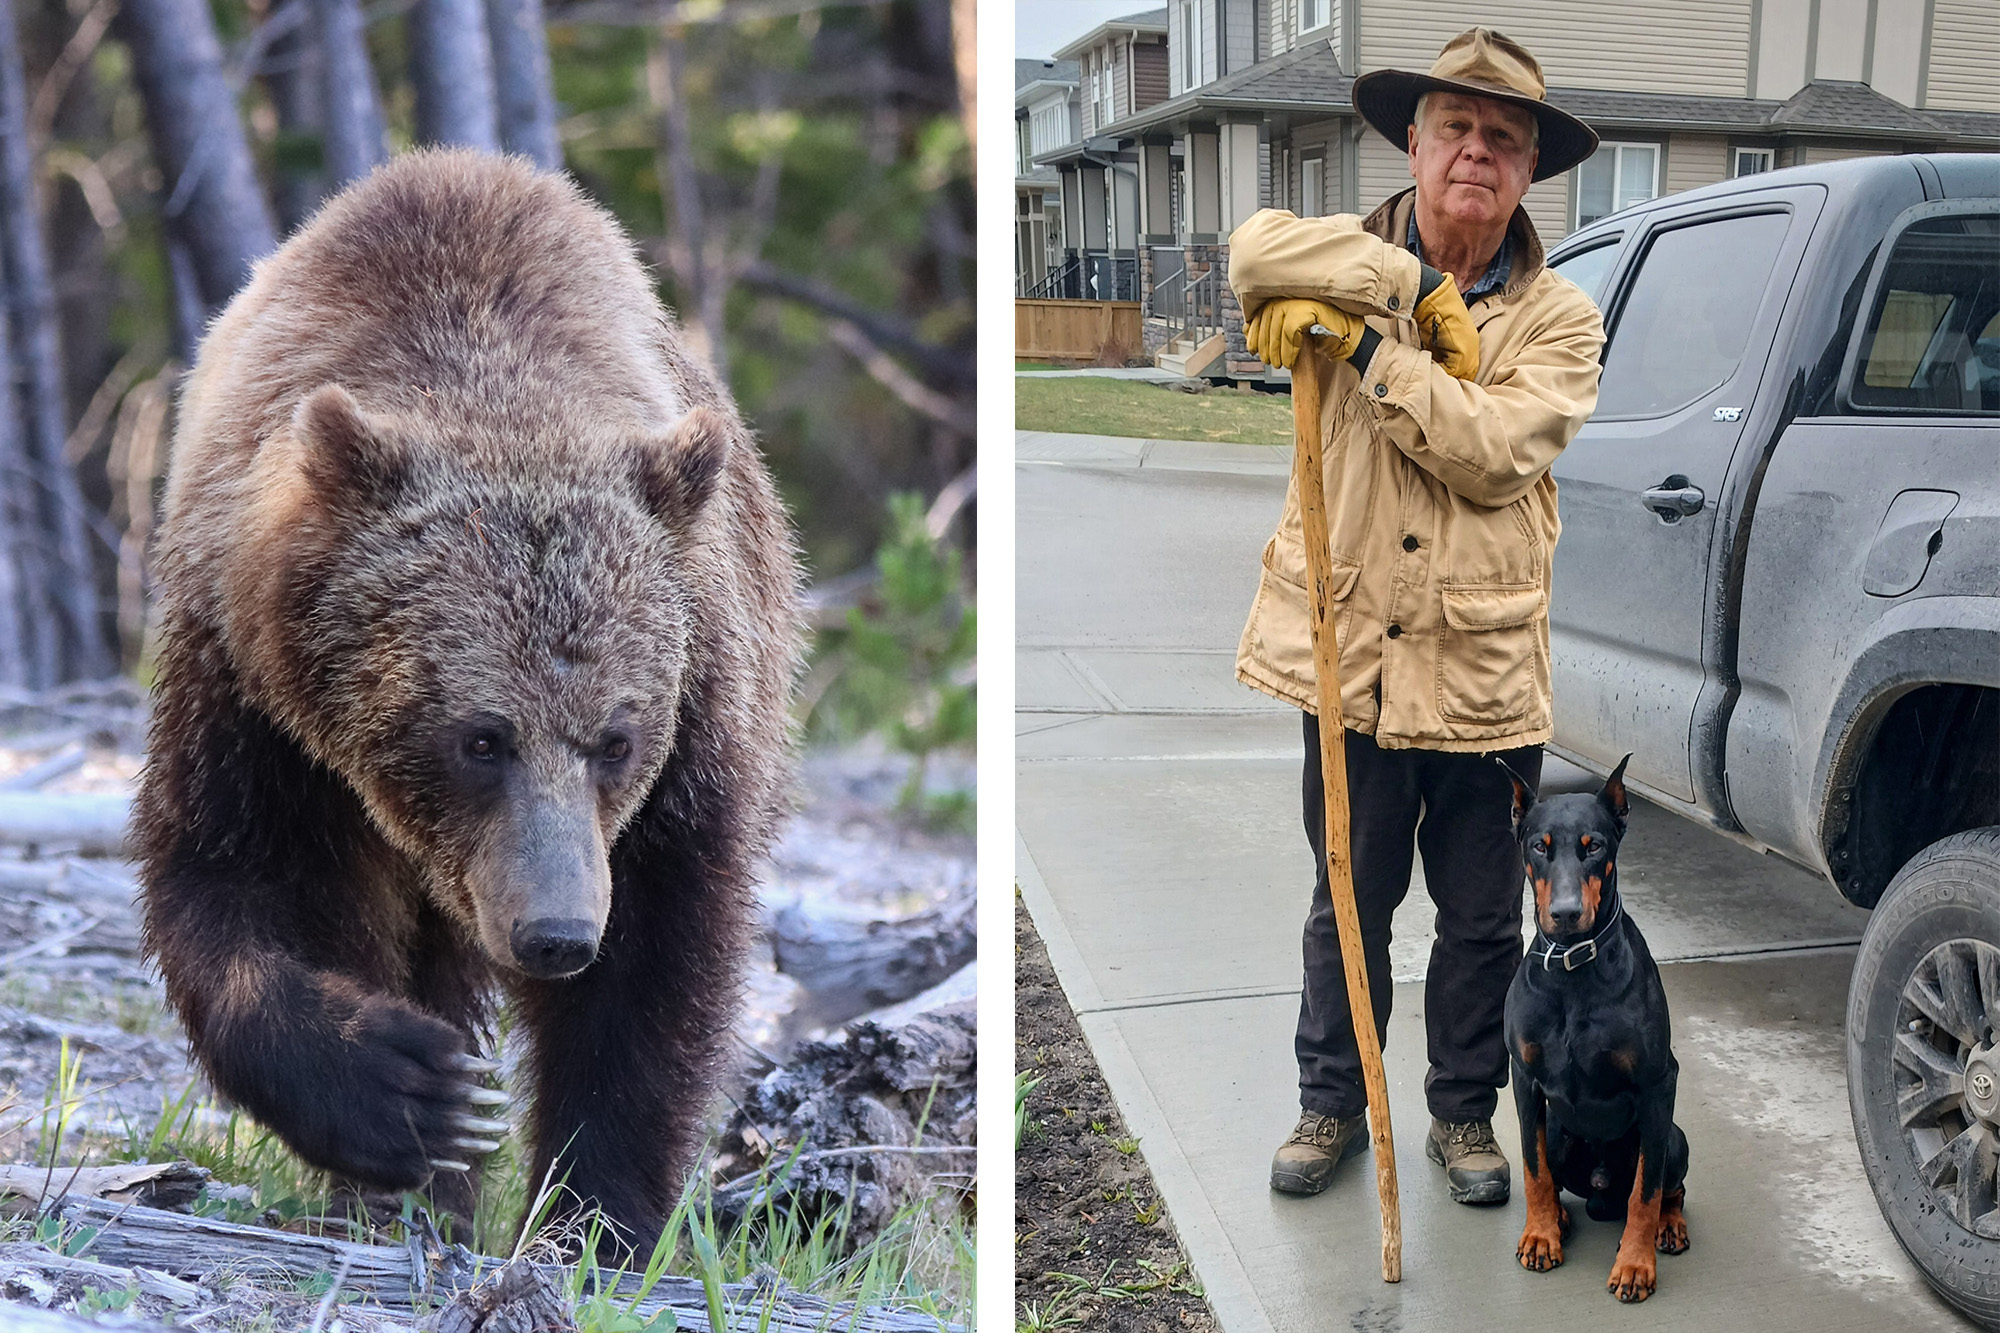 A grizzly bear; Campbell and his doberman that saved him from a grizzly.